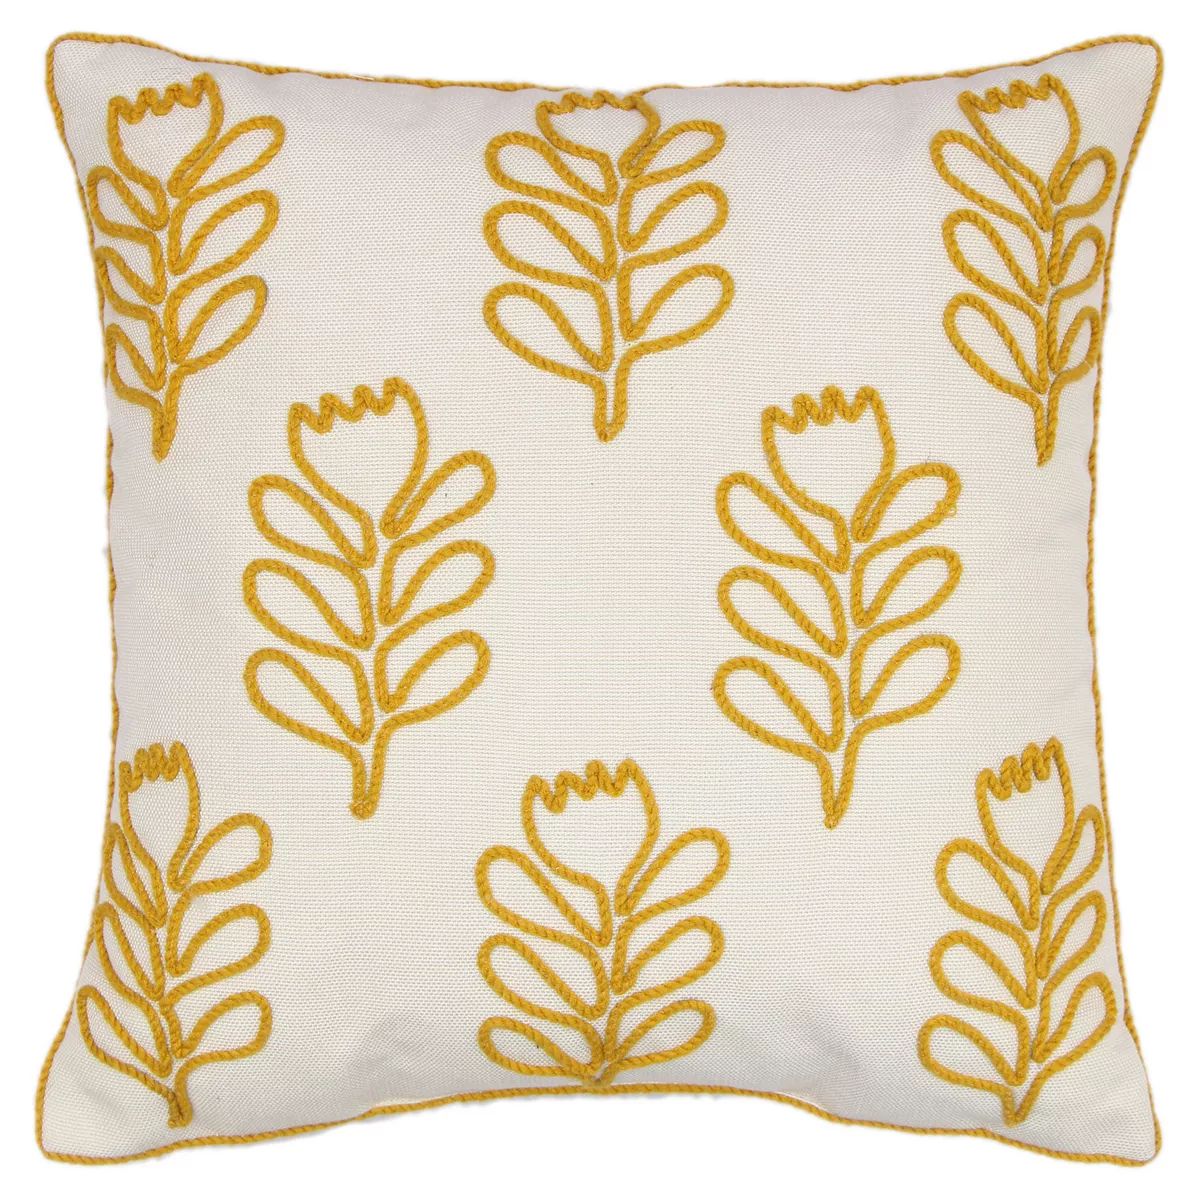 Sonoma Goods For Life® Yellow Floral Outdoor Throw Pillow | Kohl's